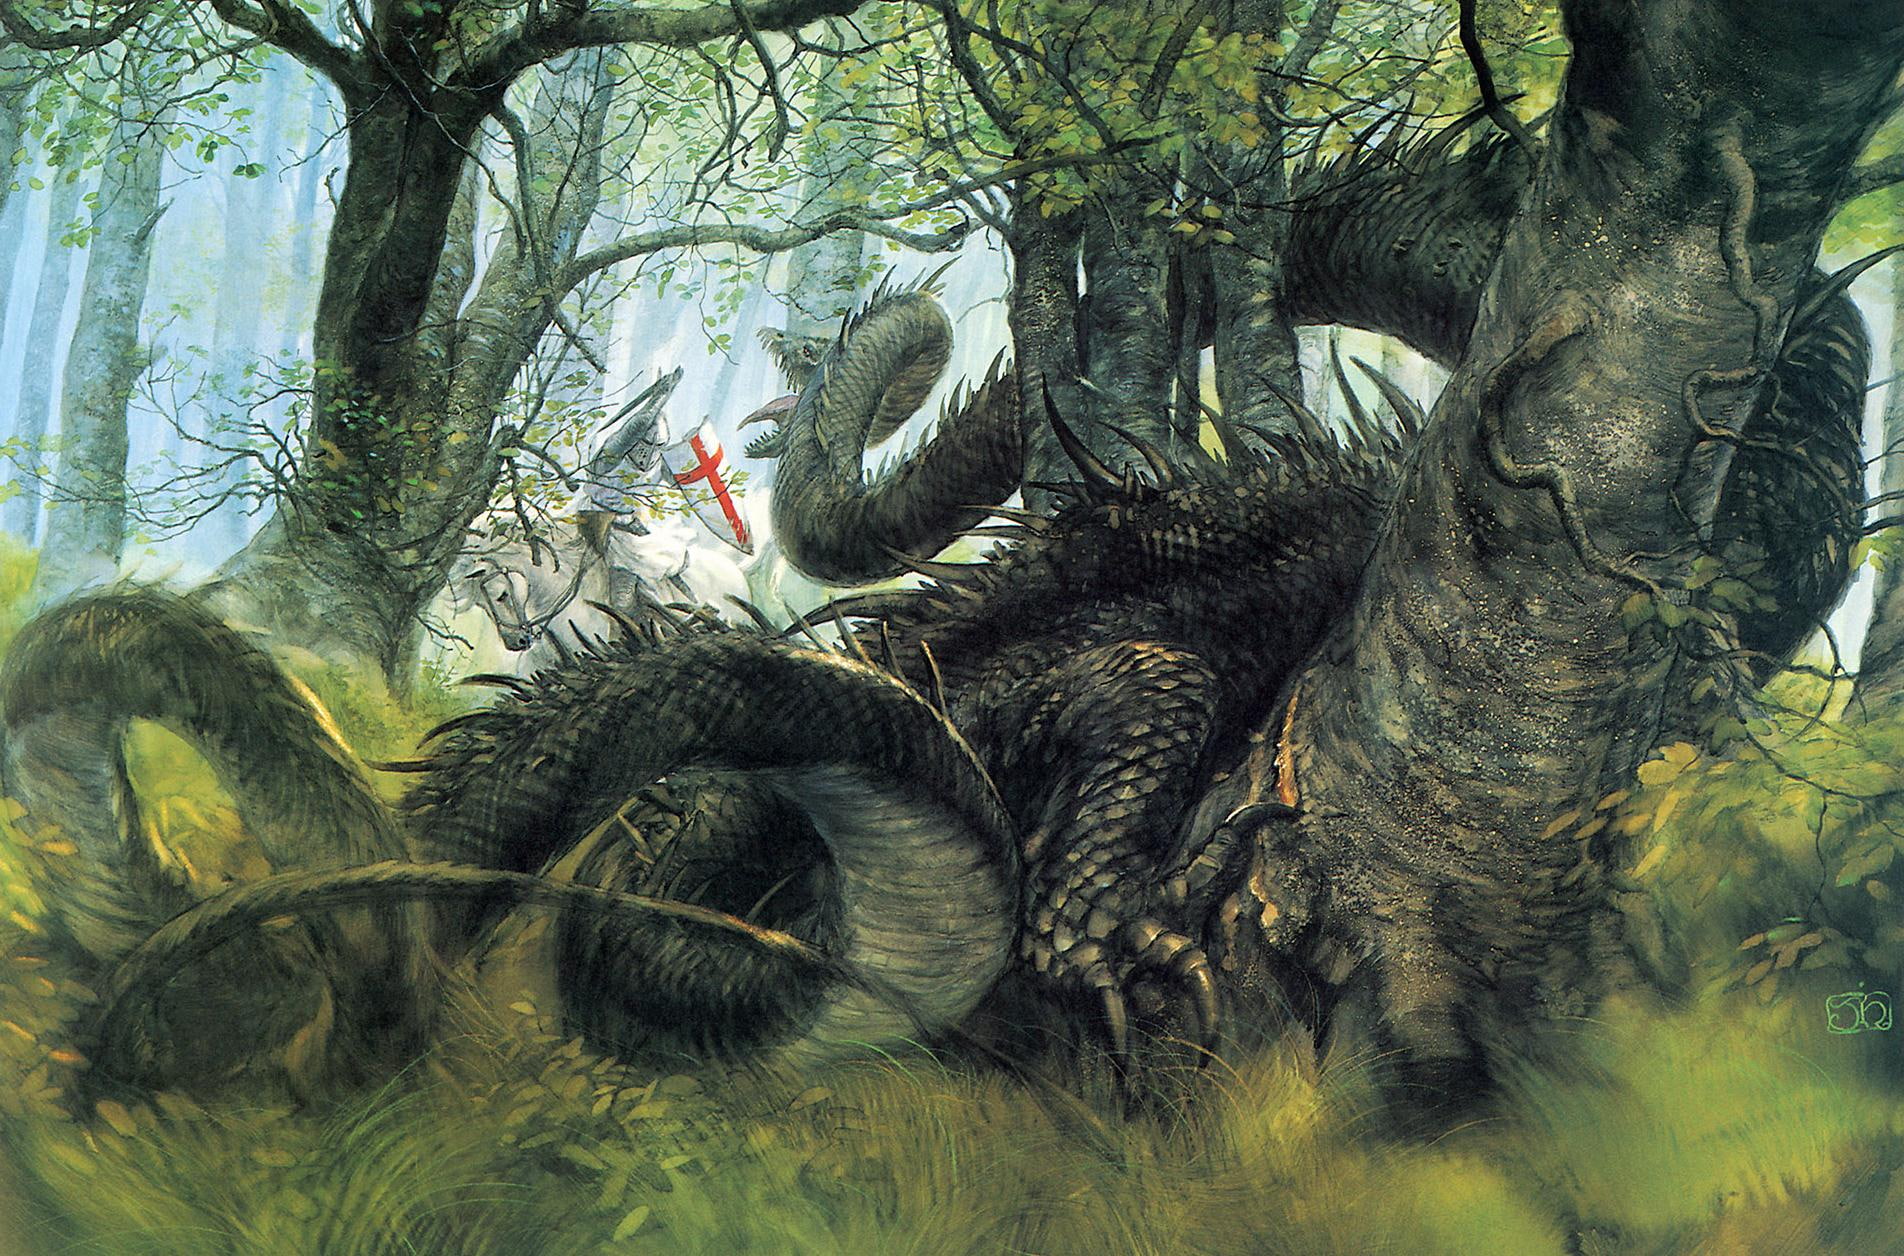 grey dragon in front of knight surrounded by trees wallpaper